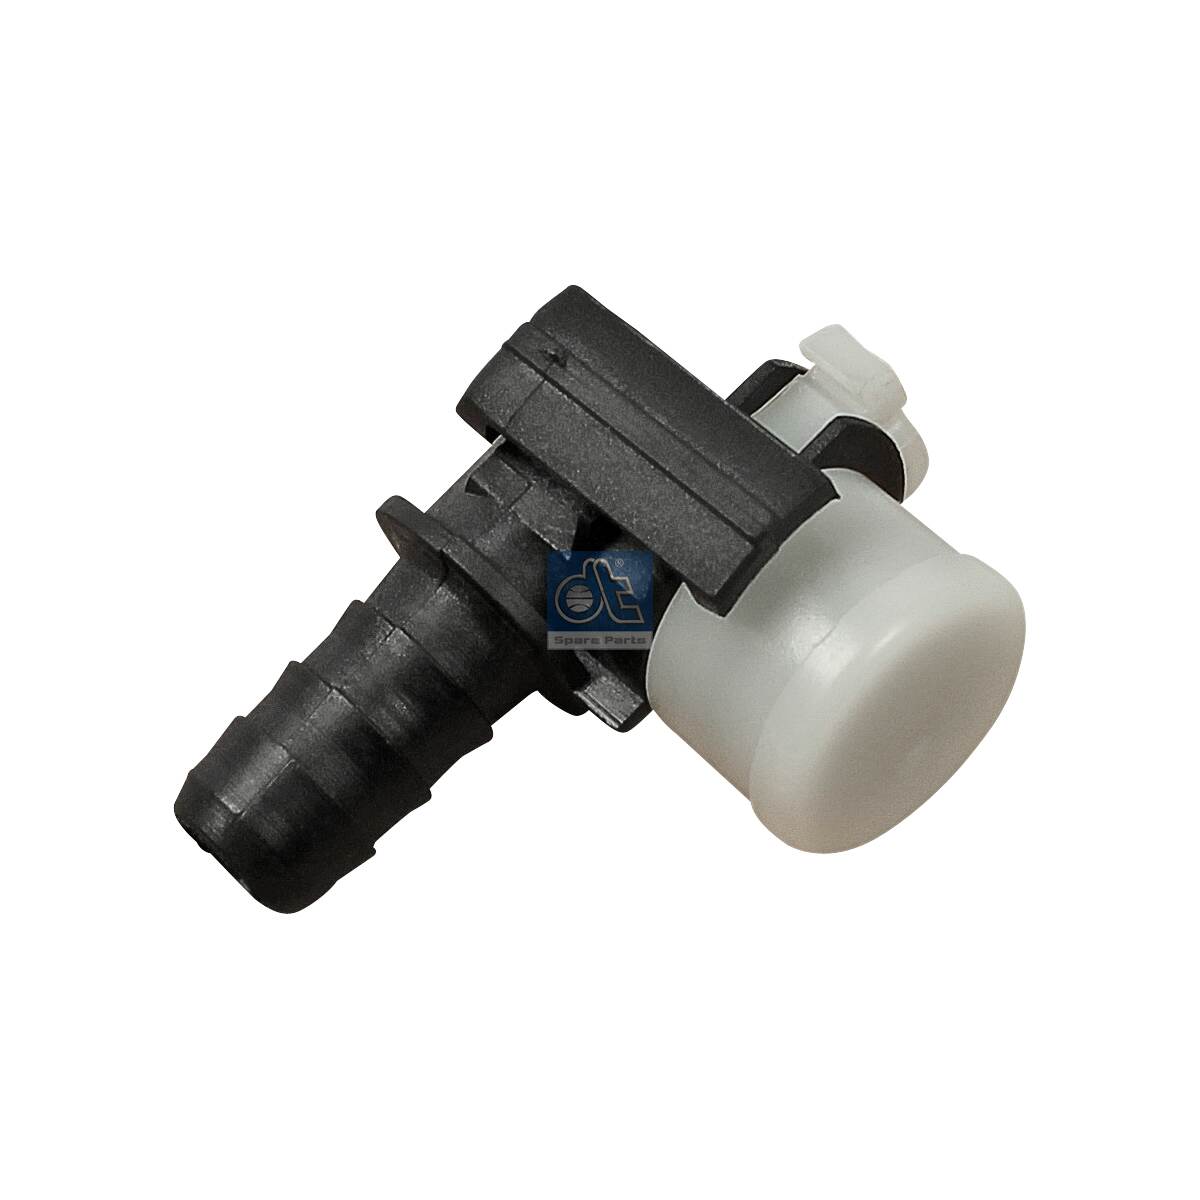 3.10225, Connector, compressed-air line, DT Spare Parts, 51.98181.6003, 51.98181.6016, 023.355, 05.19.108, 55207801, 82193, 51.98181-6003, 51.98181-6016, 51981816003, 51981816016